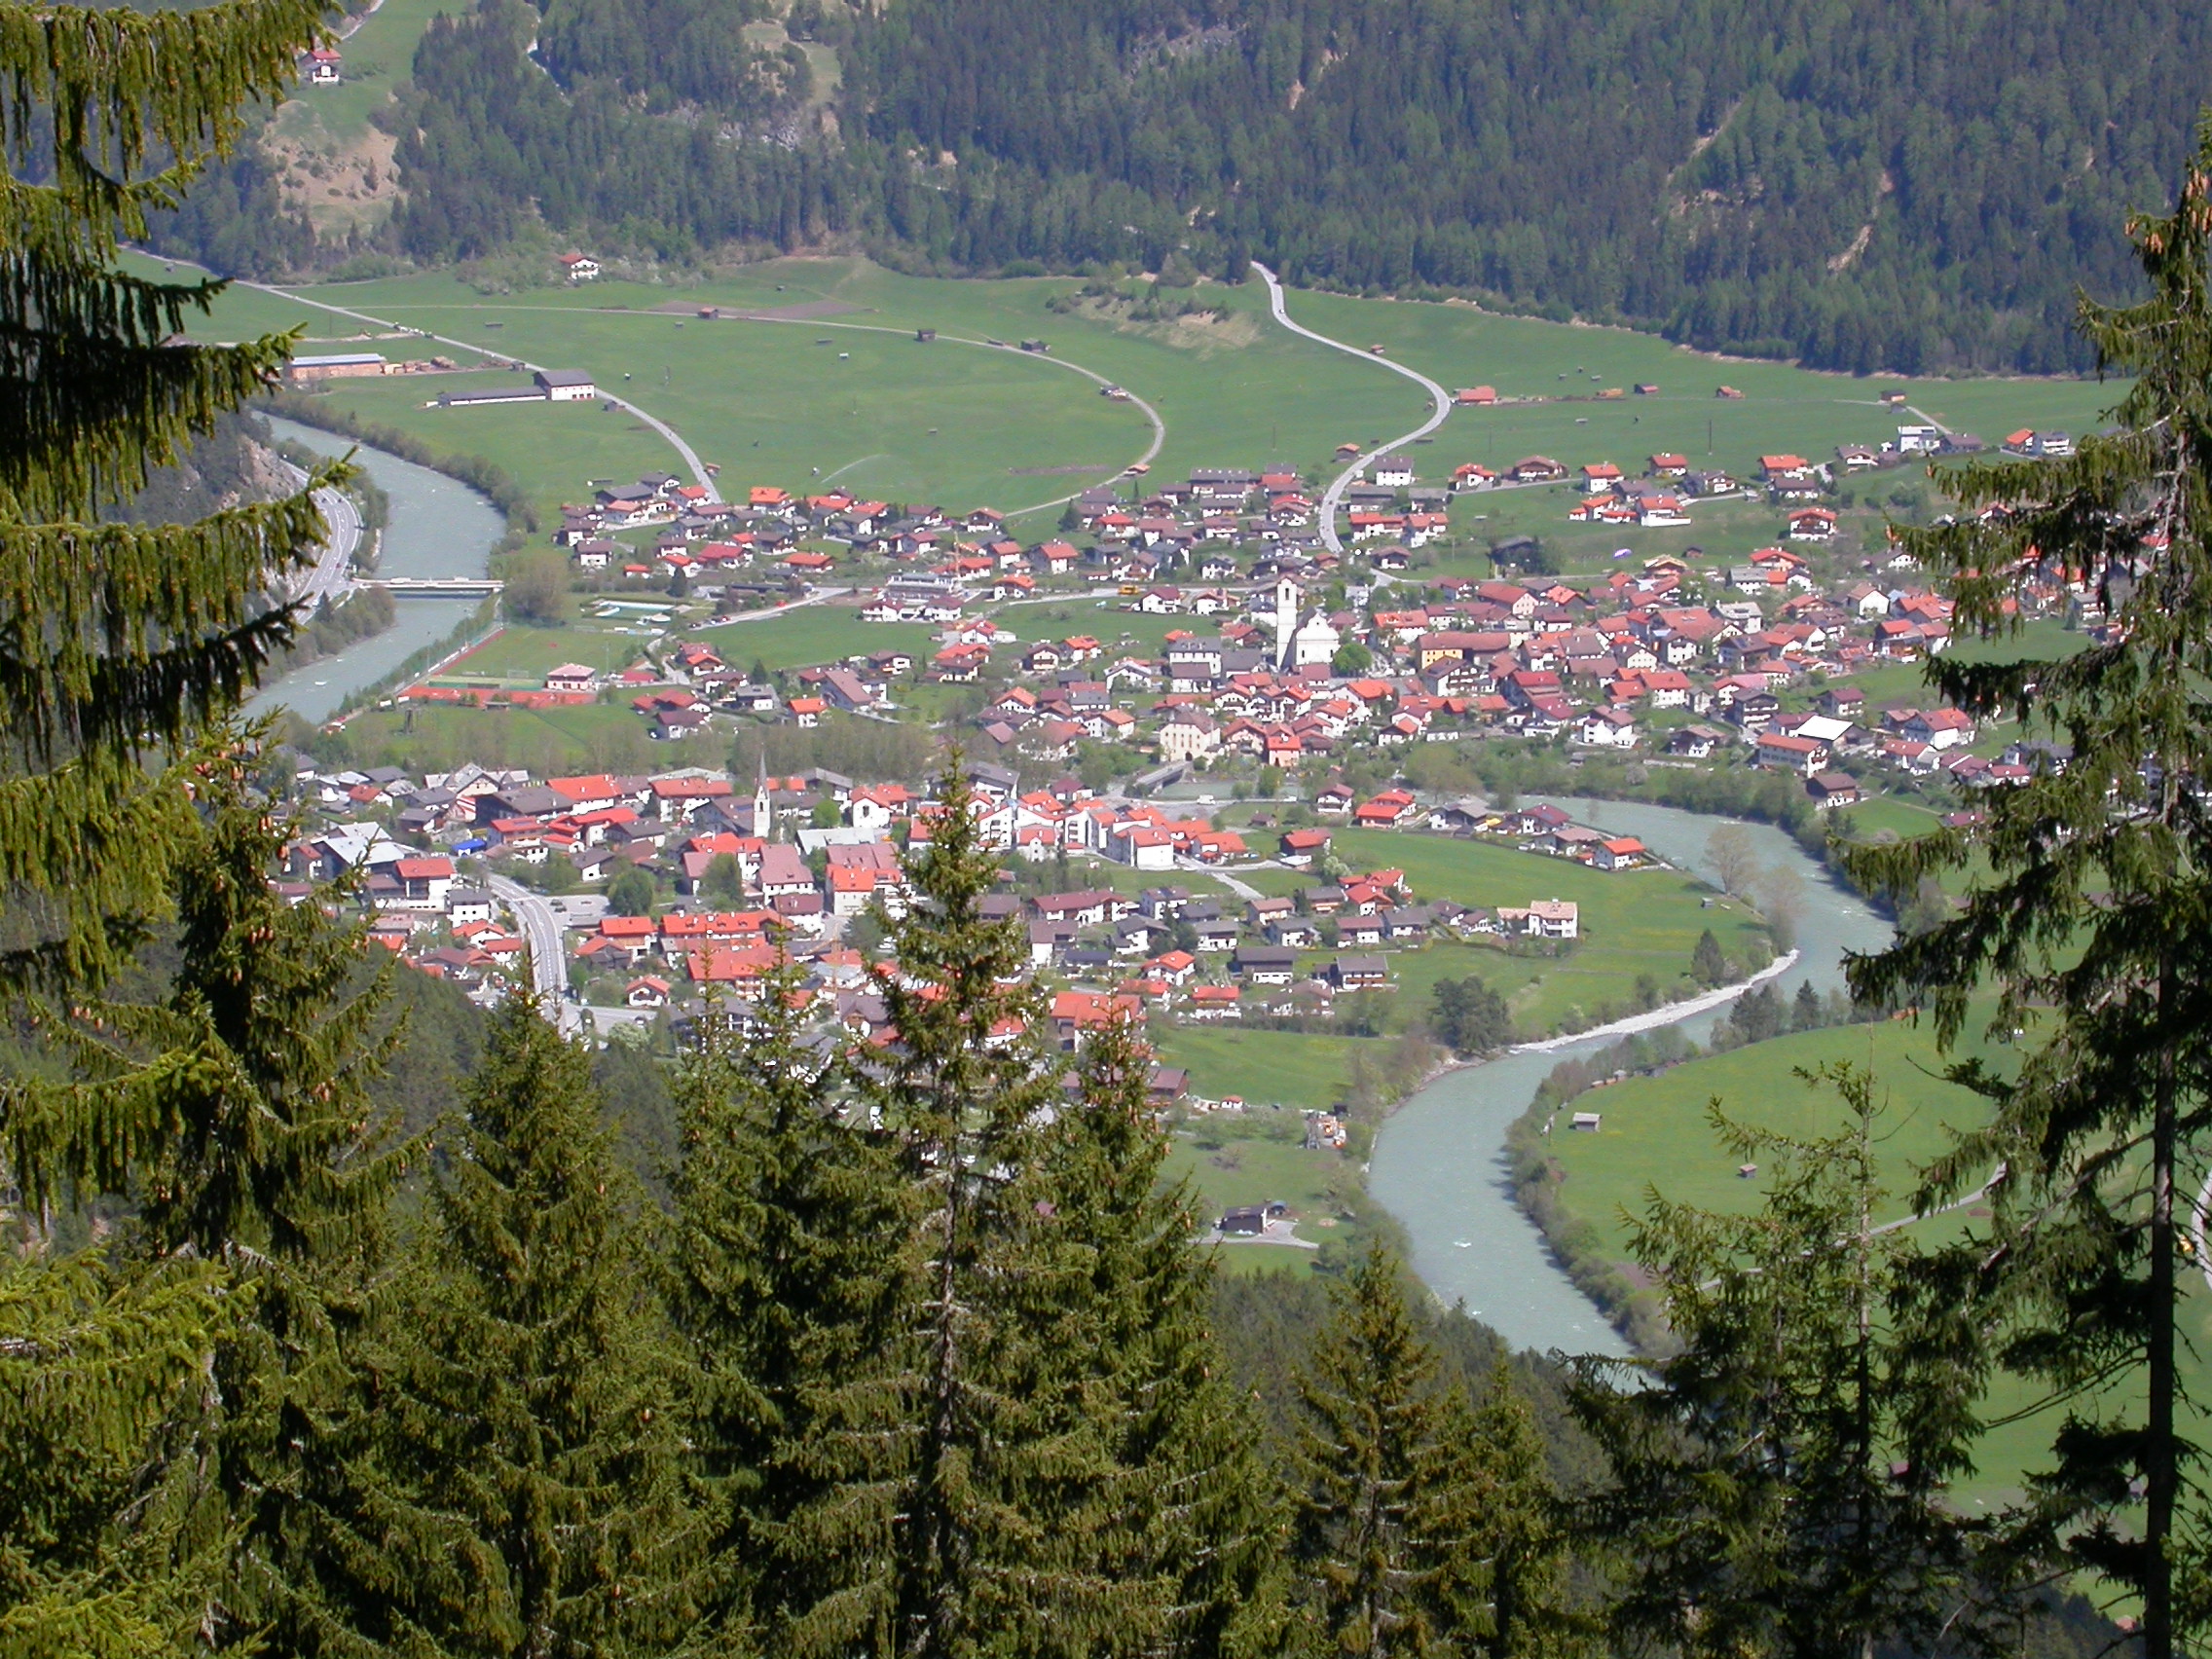 paul nature landscapes valley village alps trees ferntrees fern ferns houses city green river